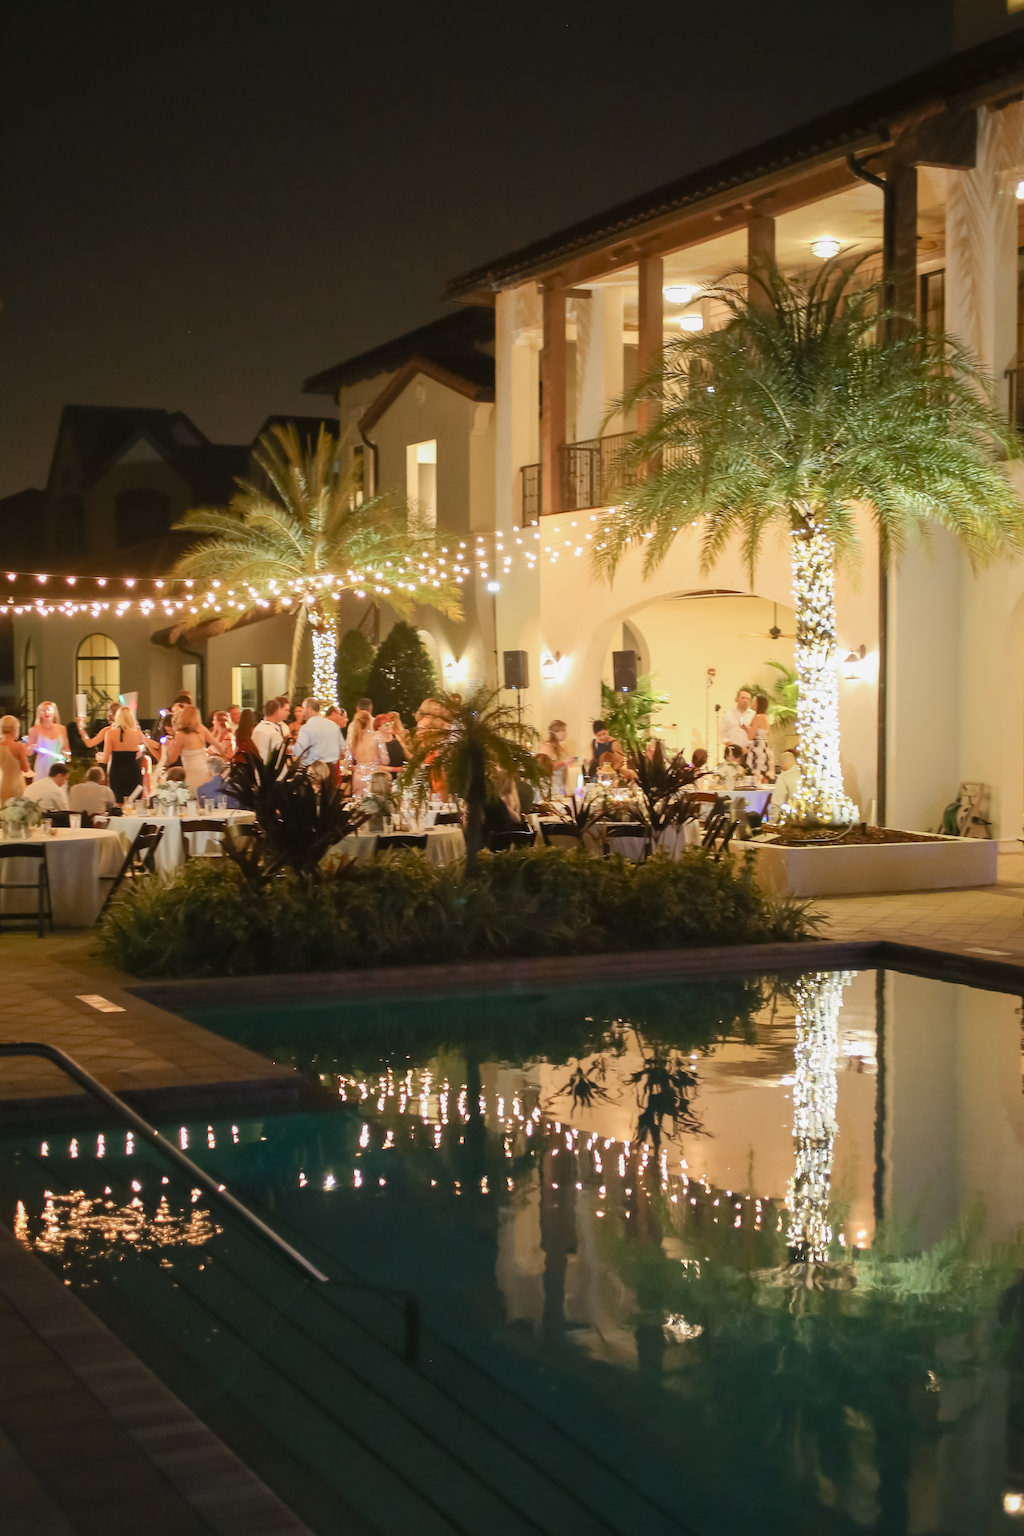 Outdoor Poolside Wedding Reception with String Lights | Tampa Bay Waterfront Wedding Venue The Westshore Yacht Club